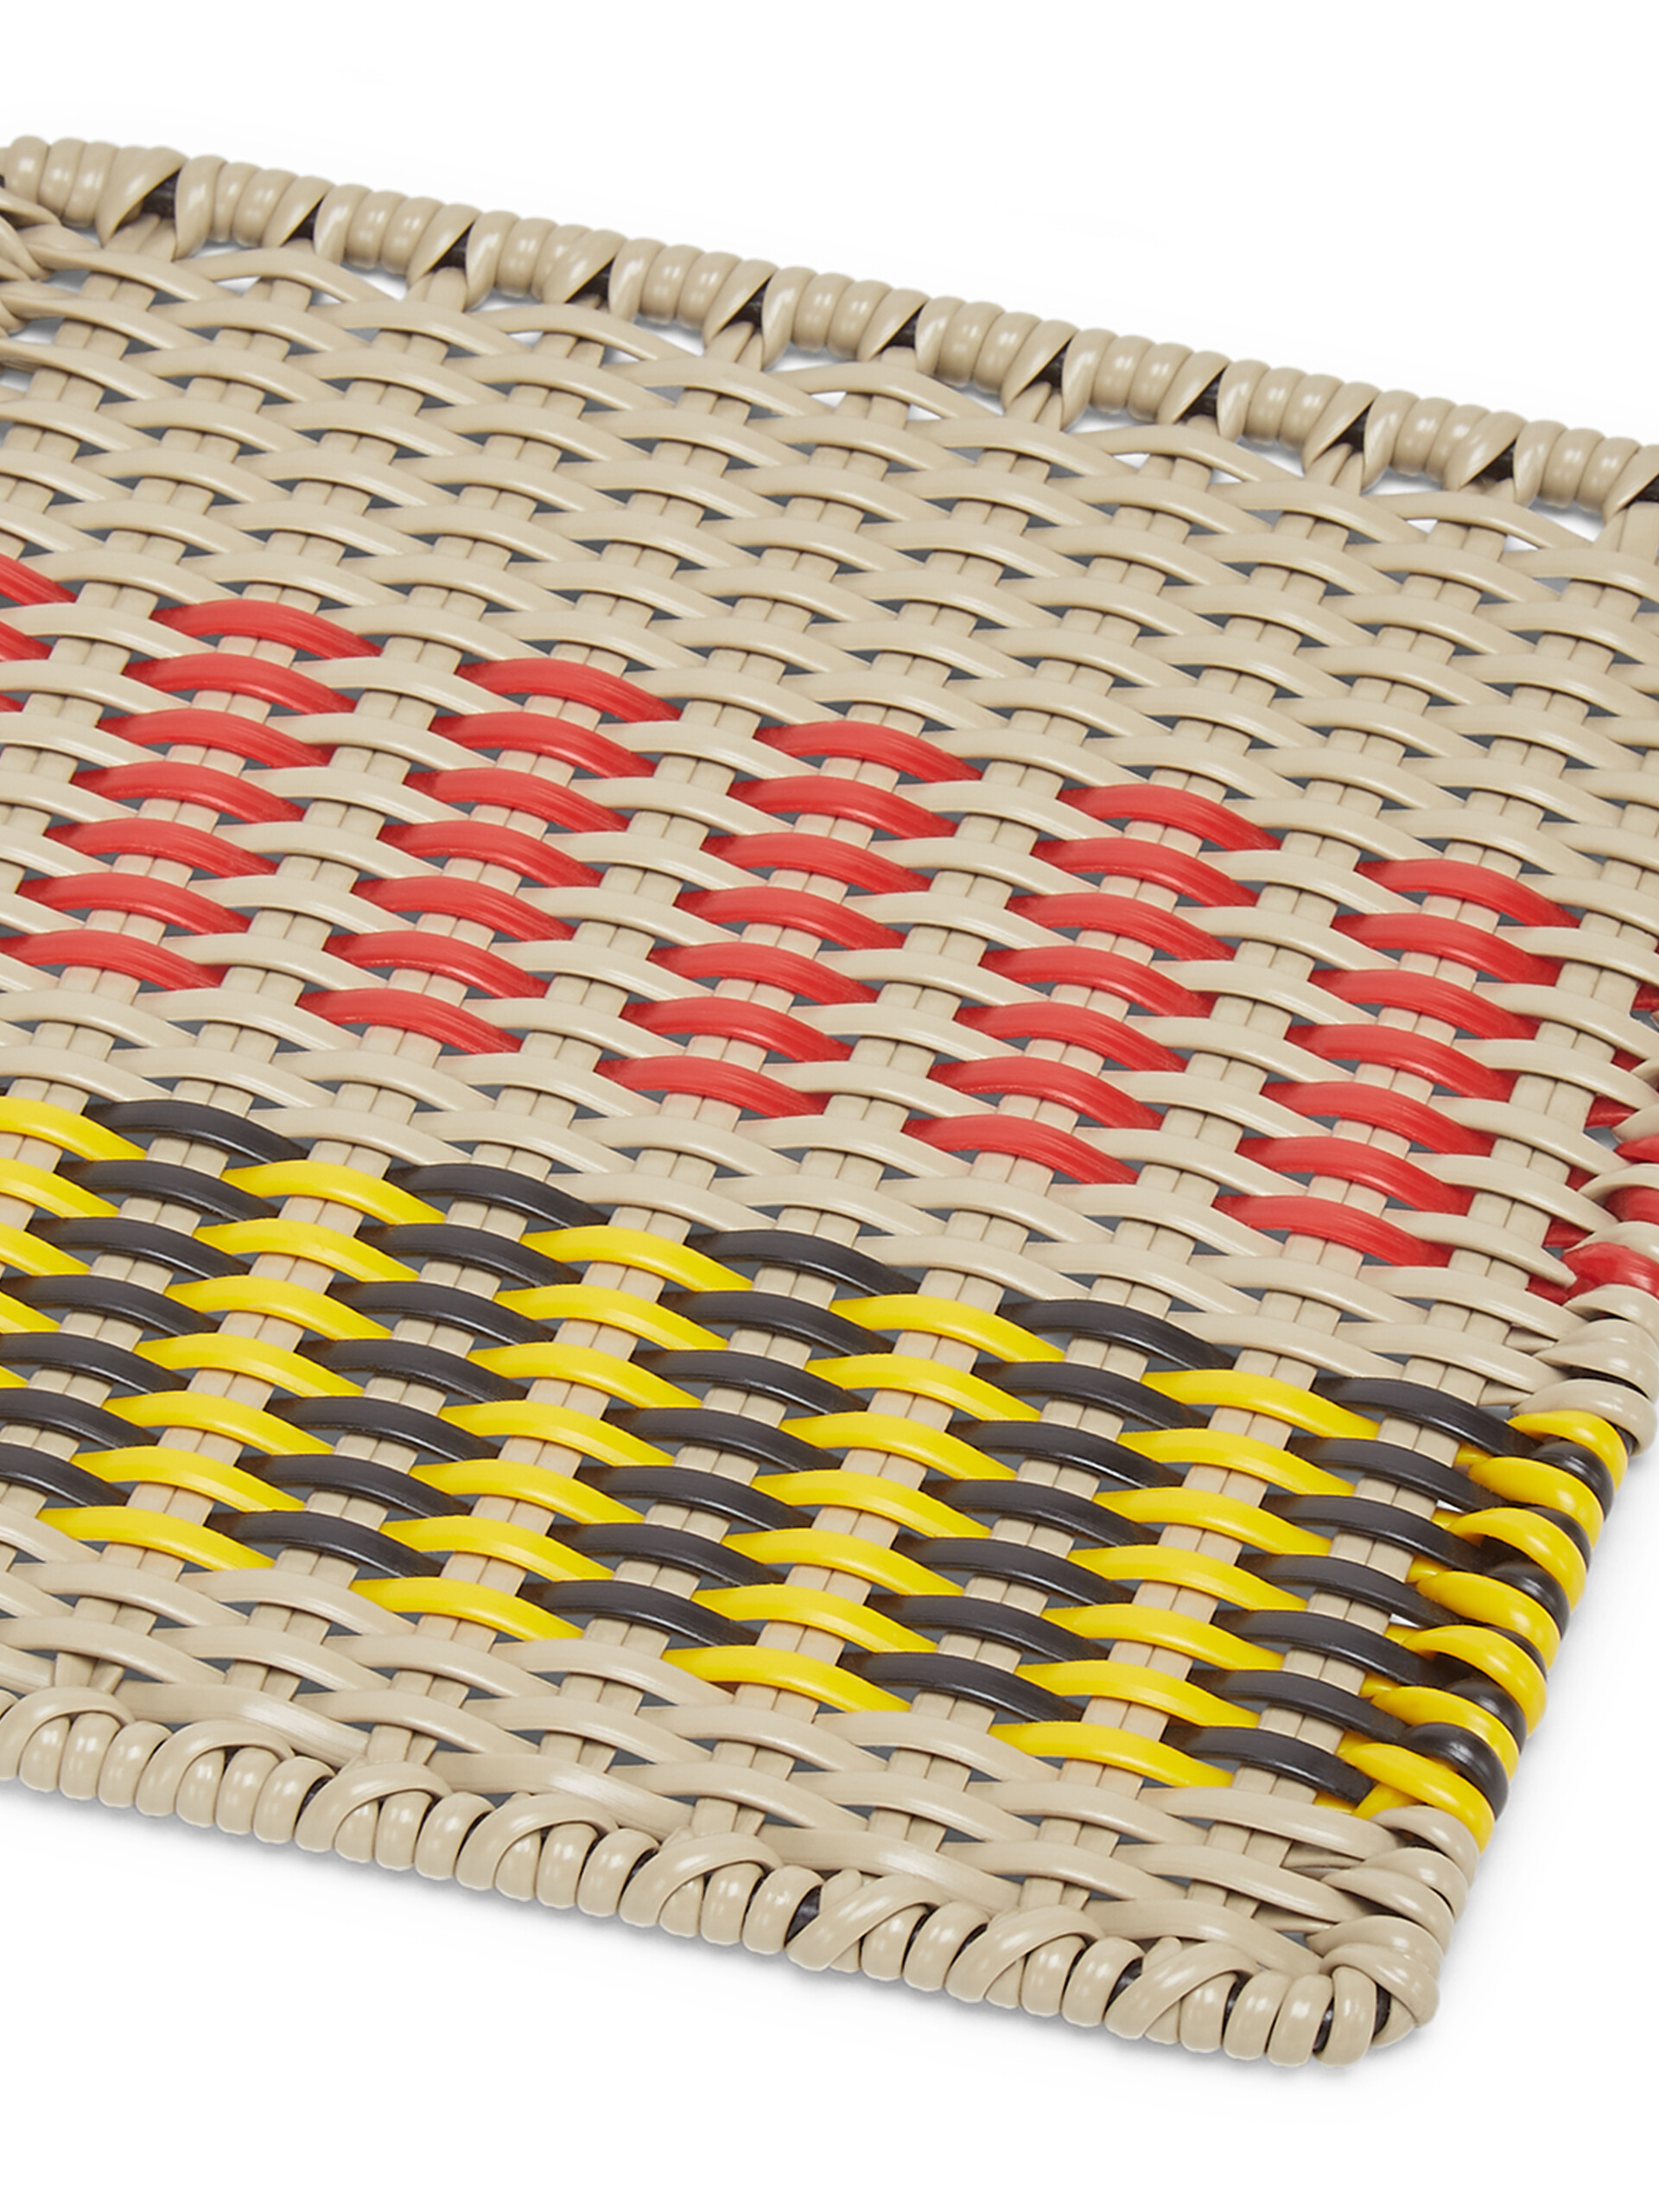 MARNI MARKET square mat with striped motif in iron and yellow, black, red and beige woven PVC - Home Accessories - Image 3